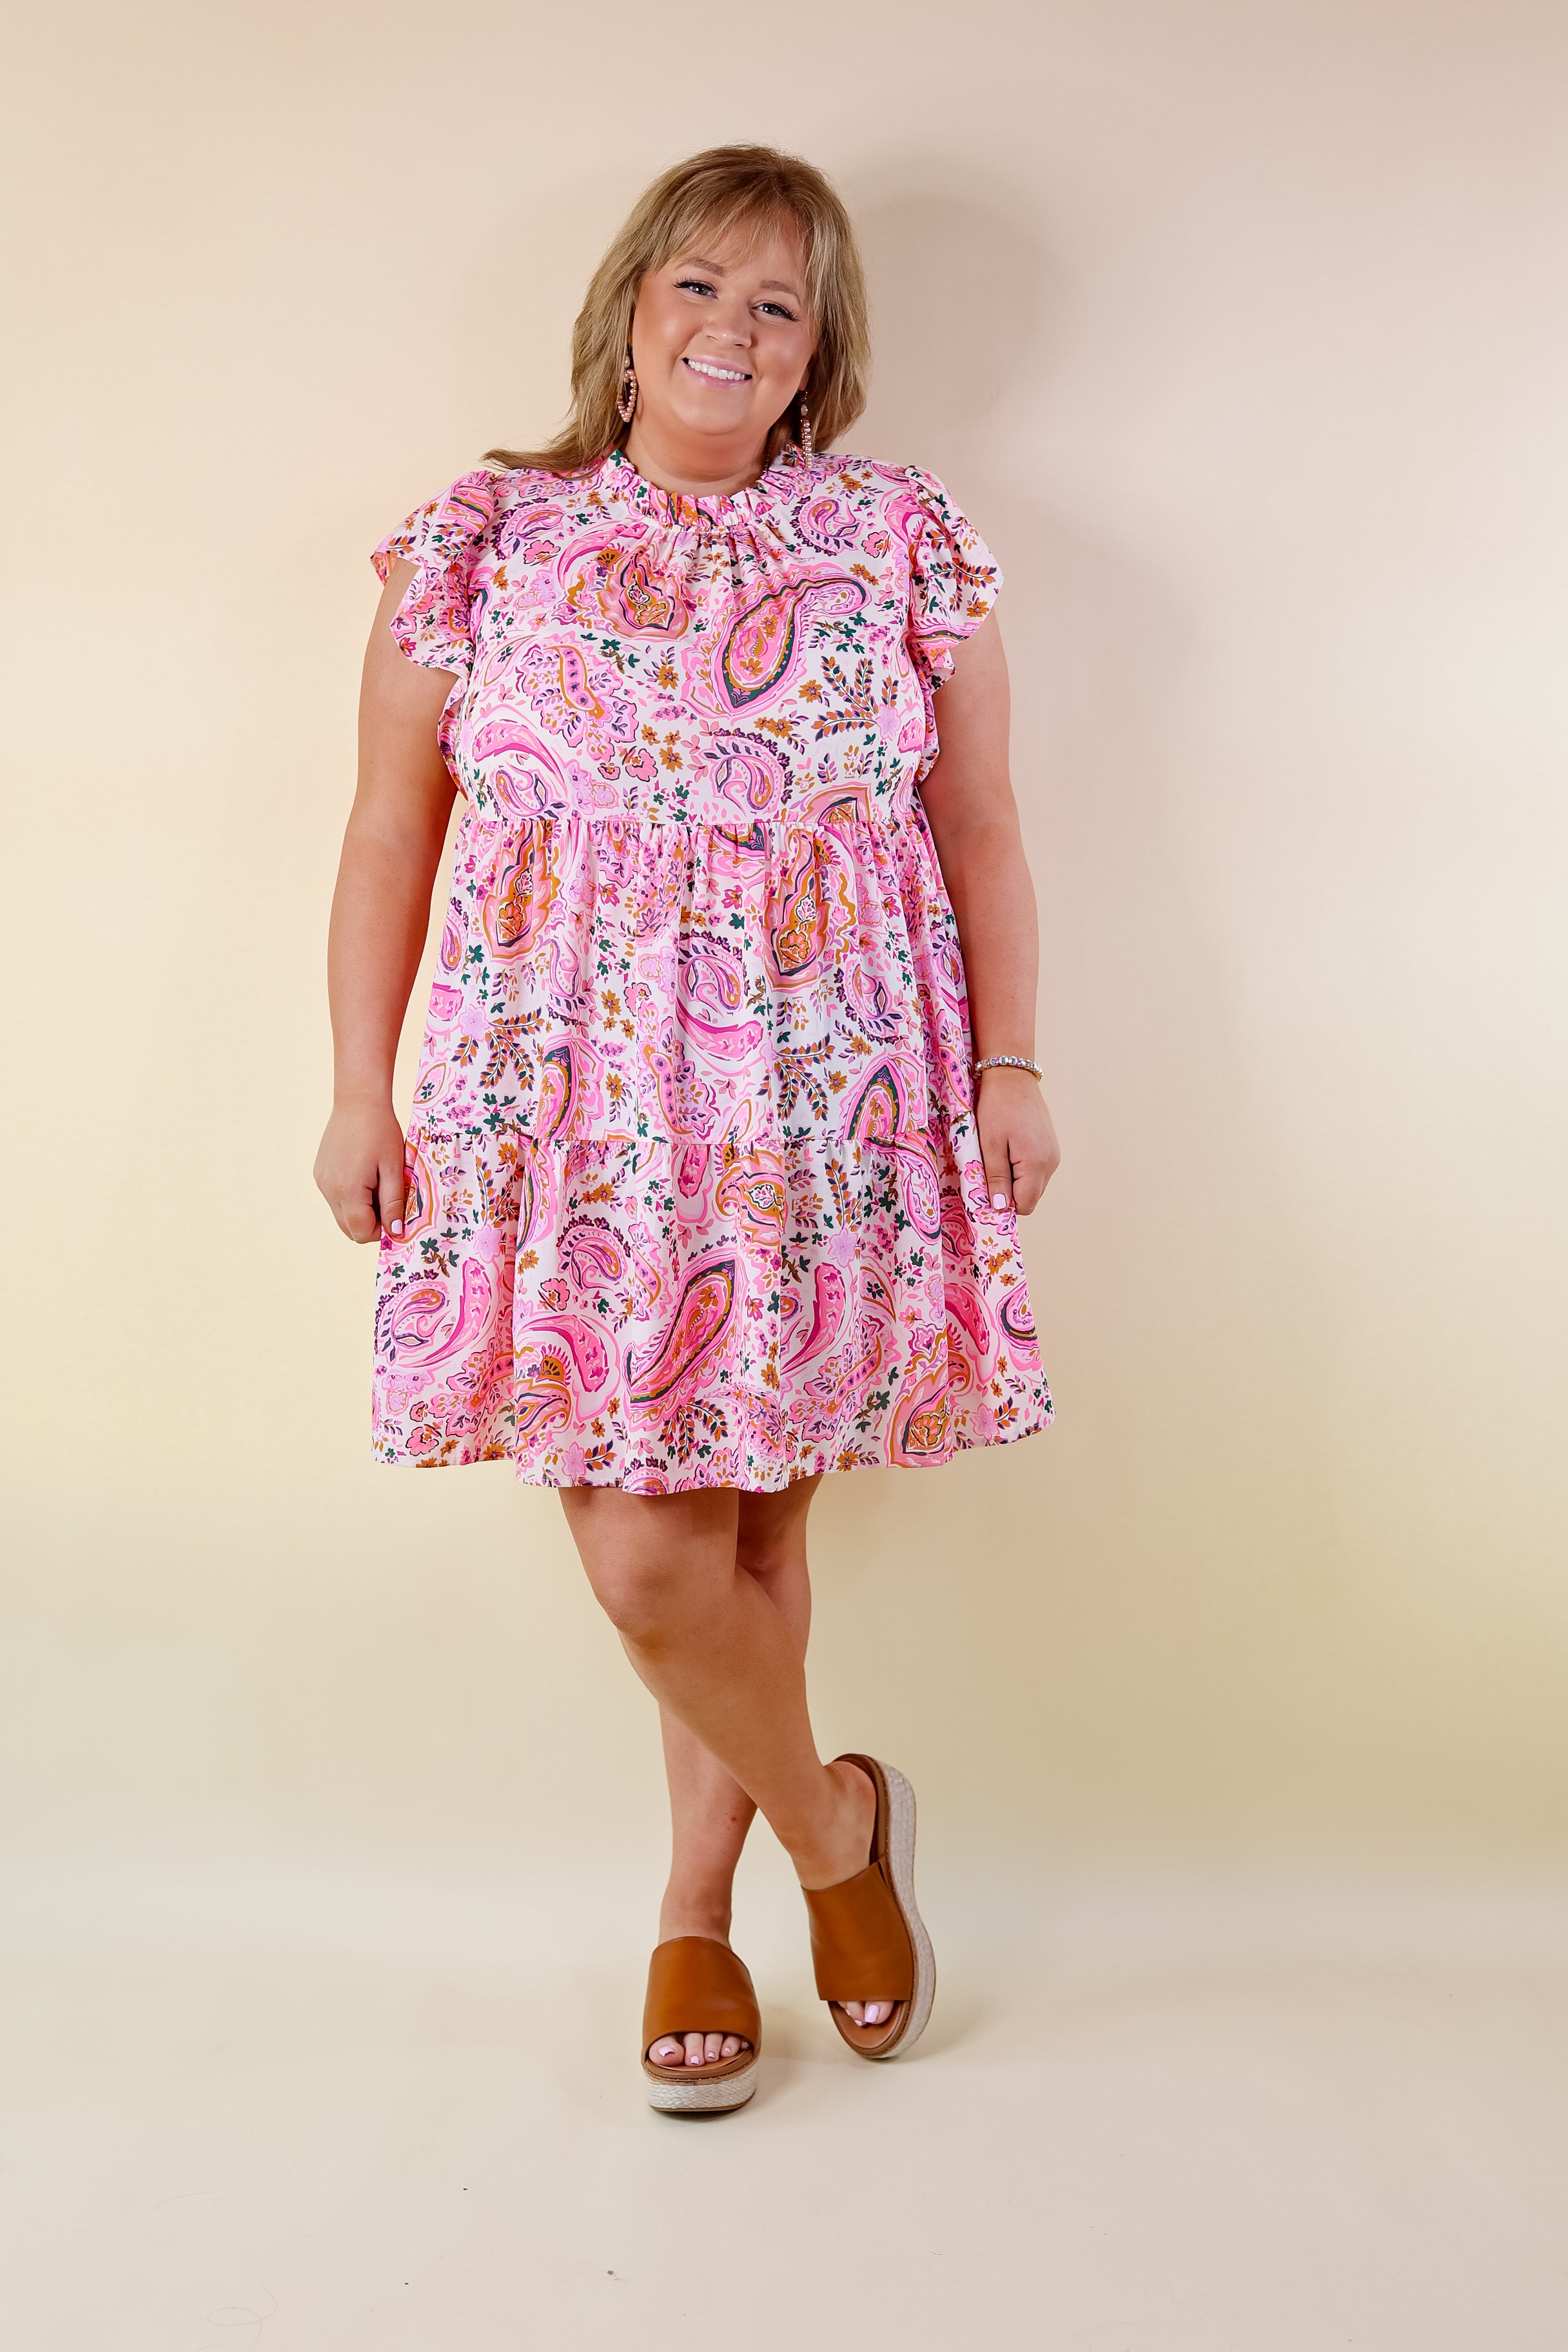 Like a Dream Paisley and Floral Print Dress in Pink - Giddy Up Glamour Boutique